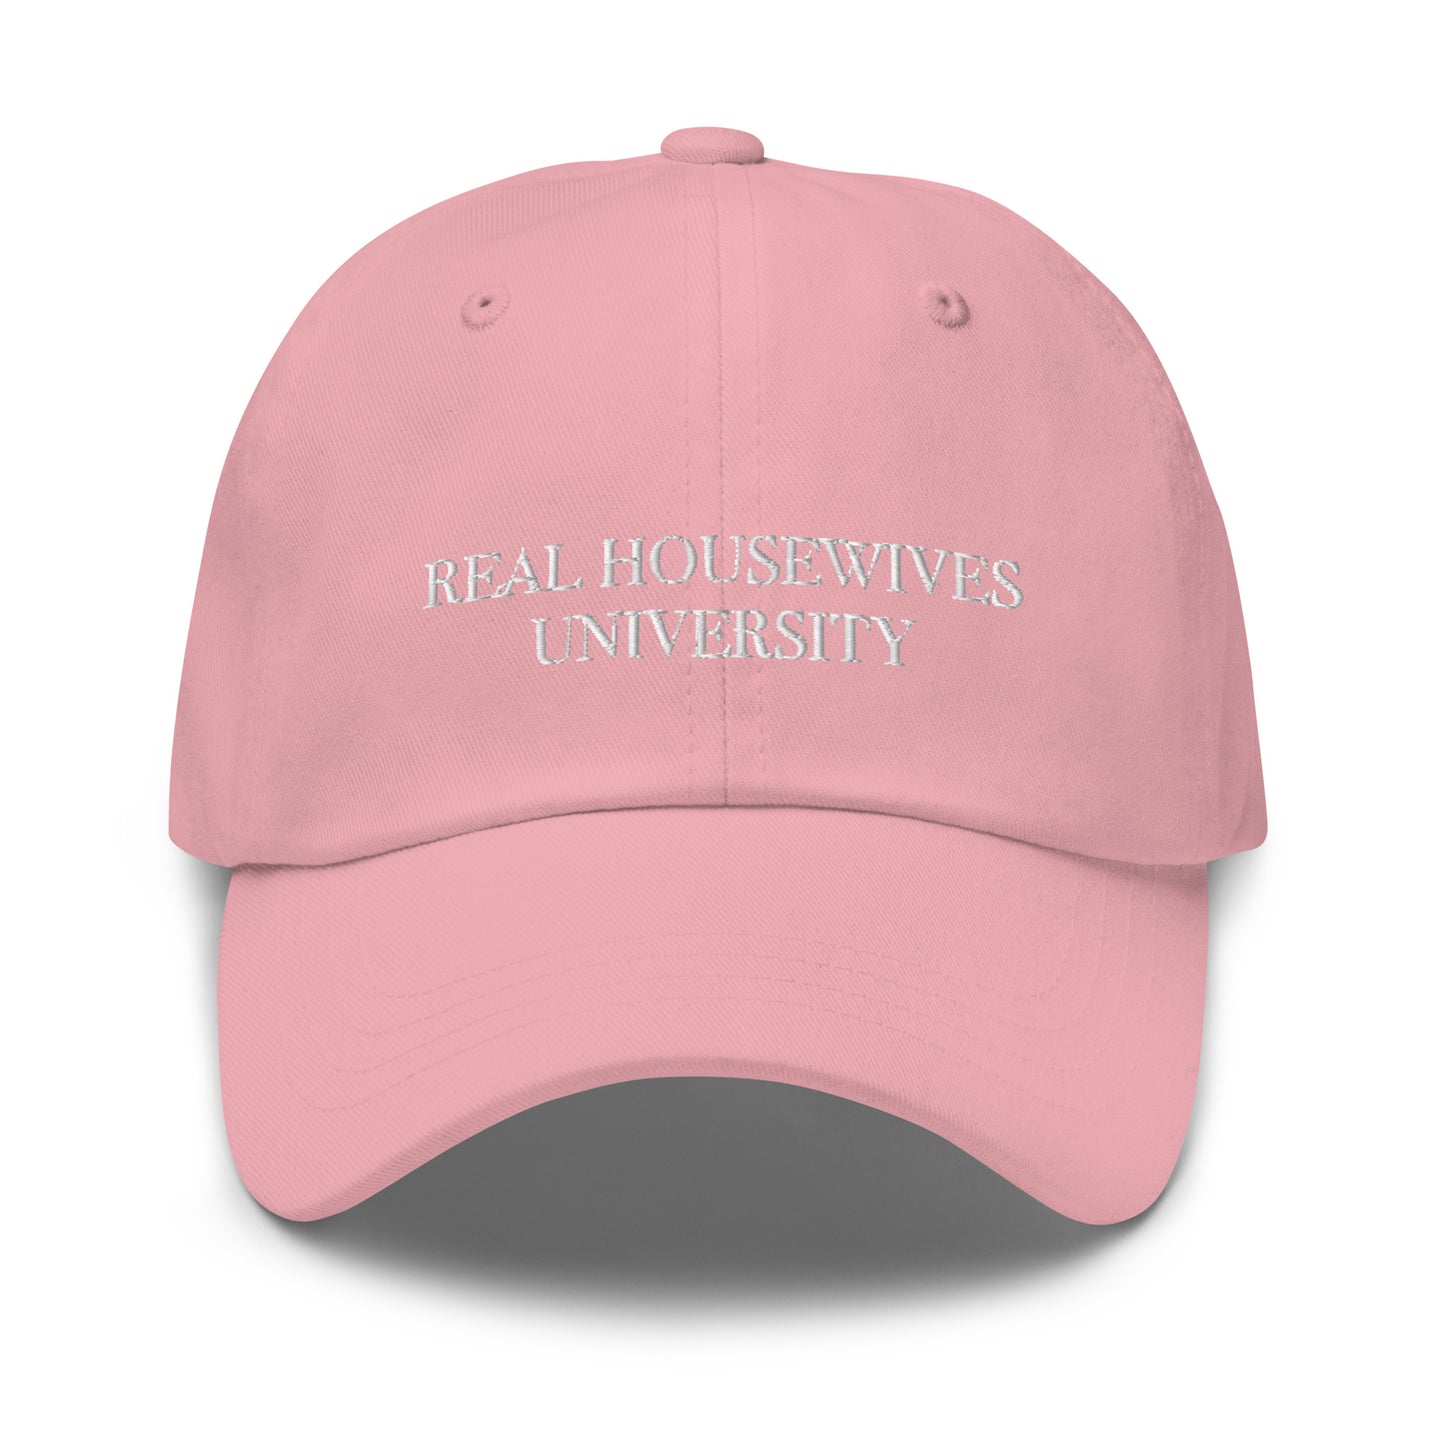 Real Housewives University - Dad hat